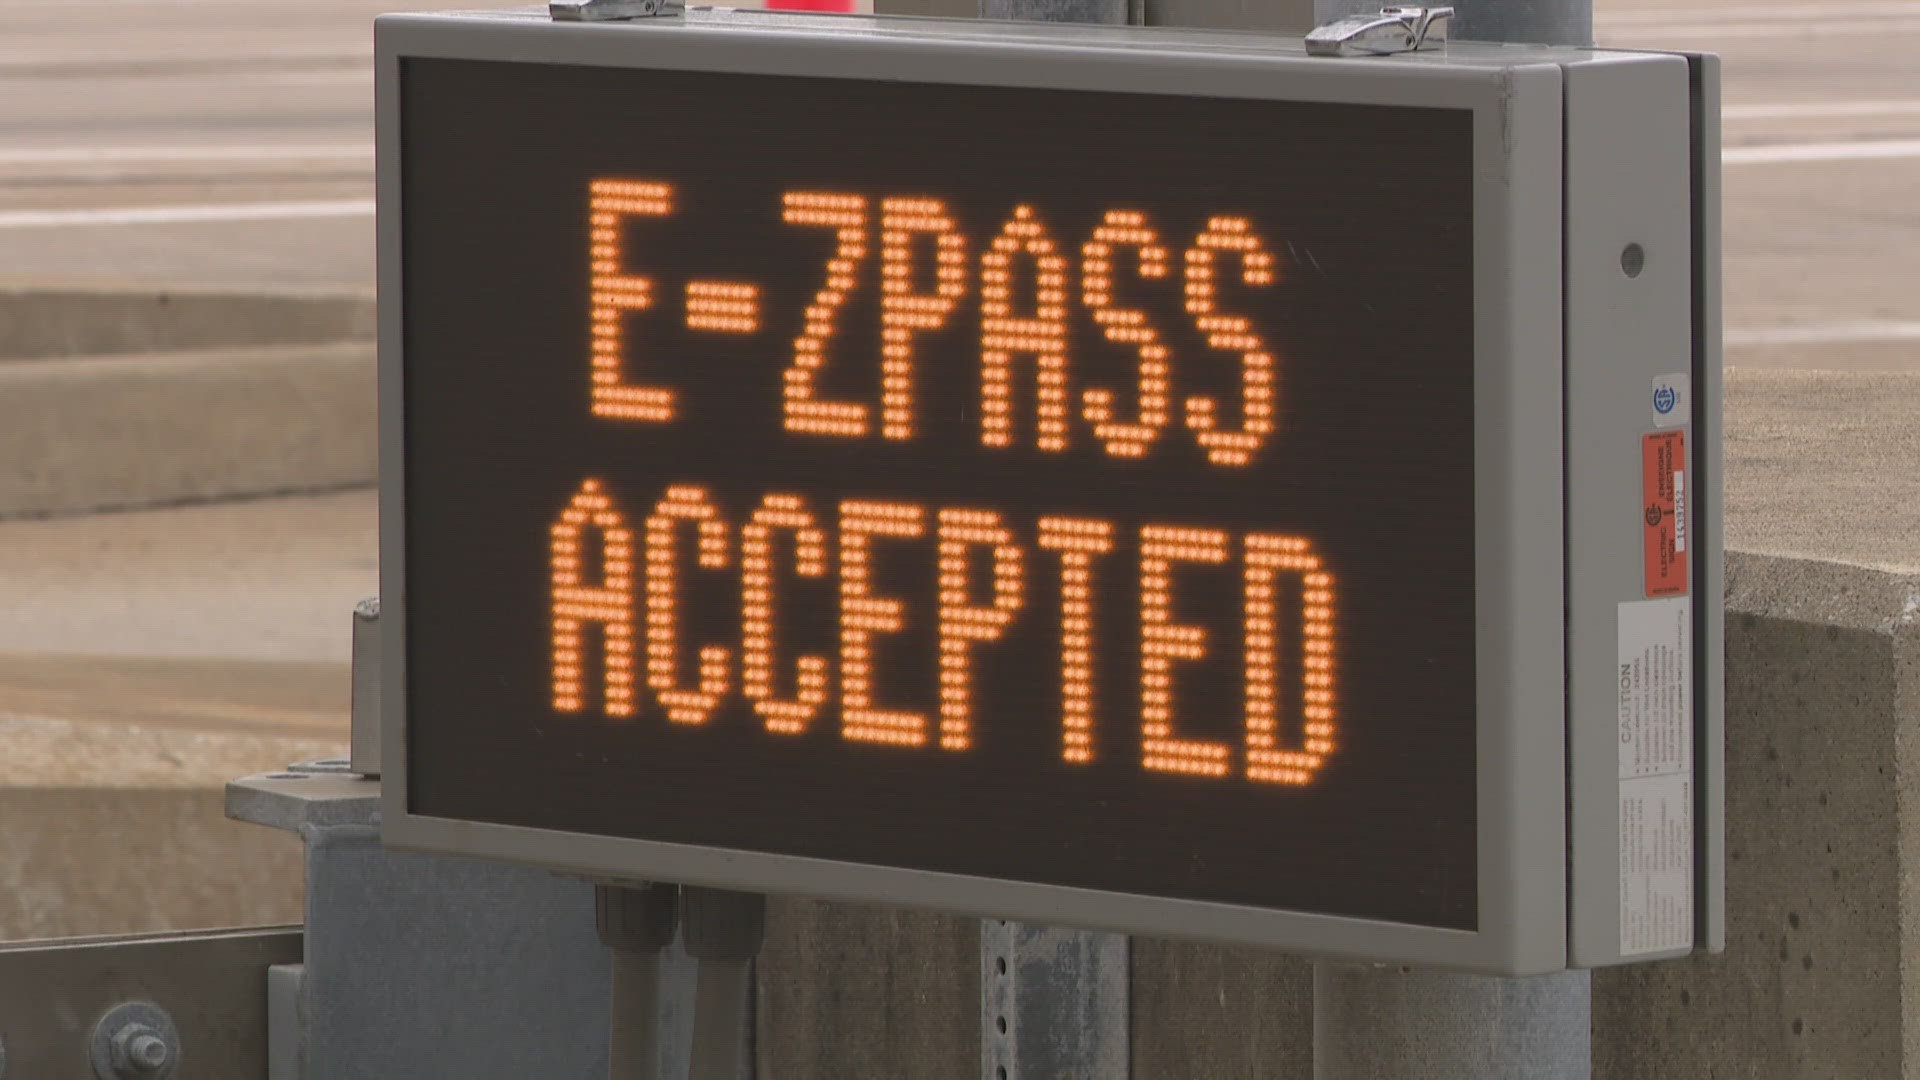 If your travels take you along the Ohio Turnpike, here's a closer look at all the changes after the multi-year modernization has finally taken effect.